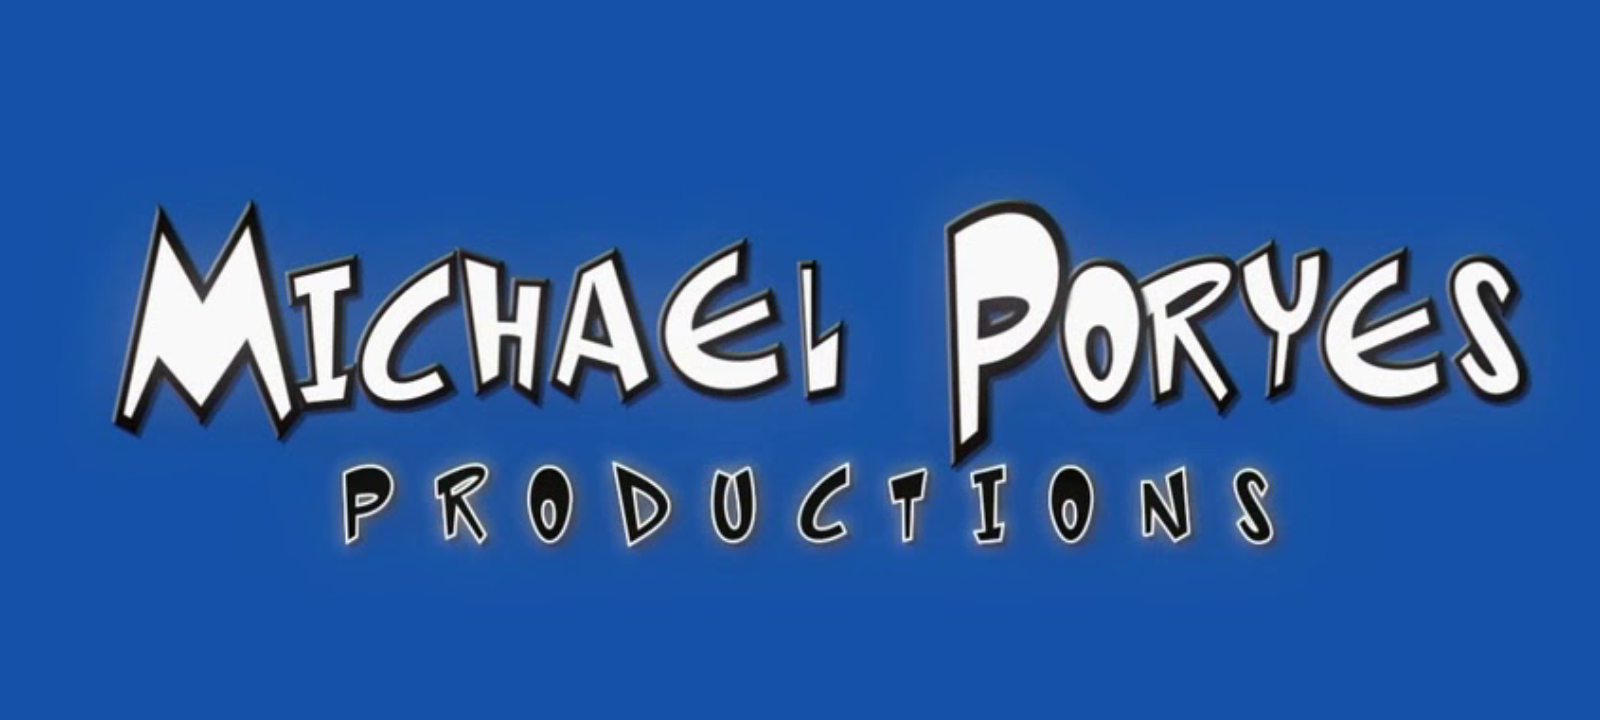 Michael Poryes Productions - company